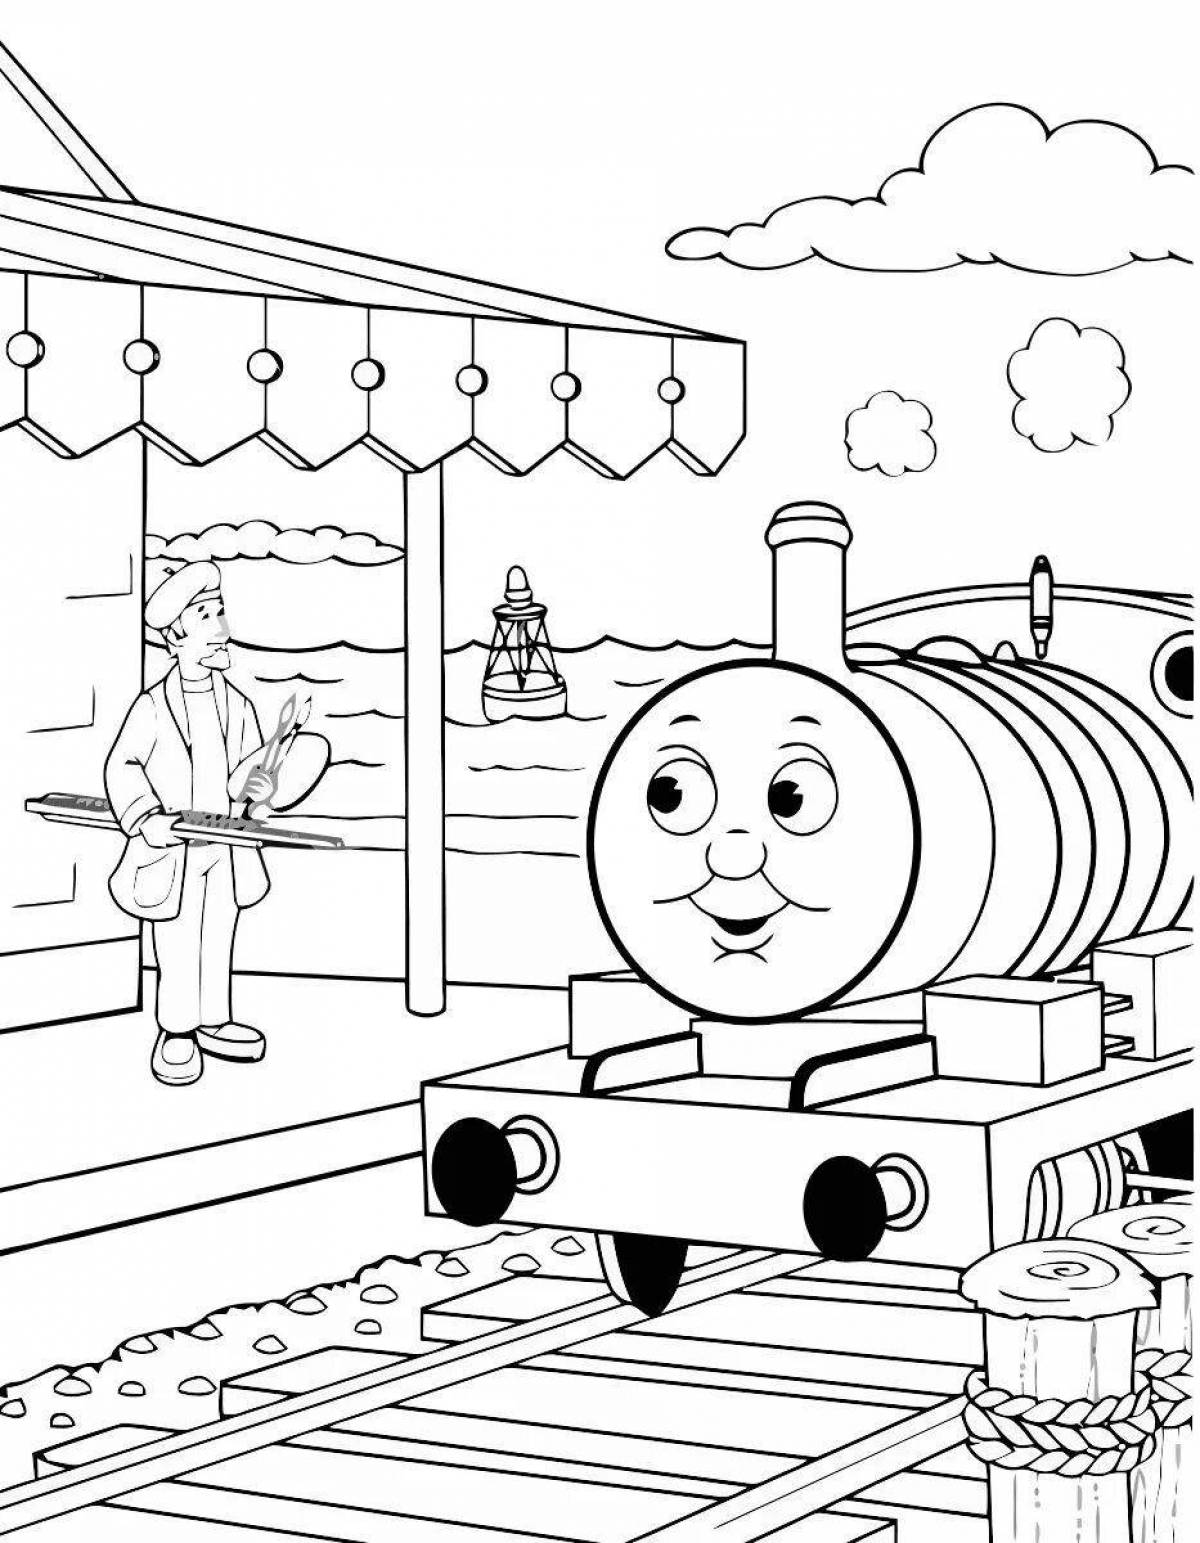 Thomas' creative train coloring for kids